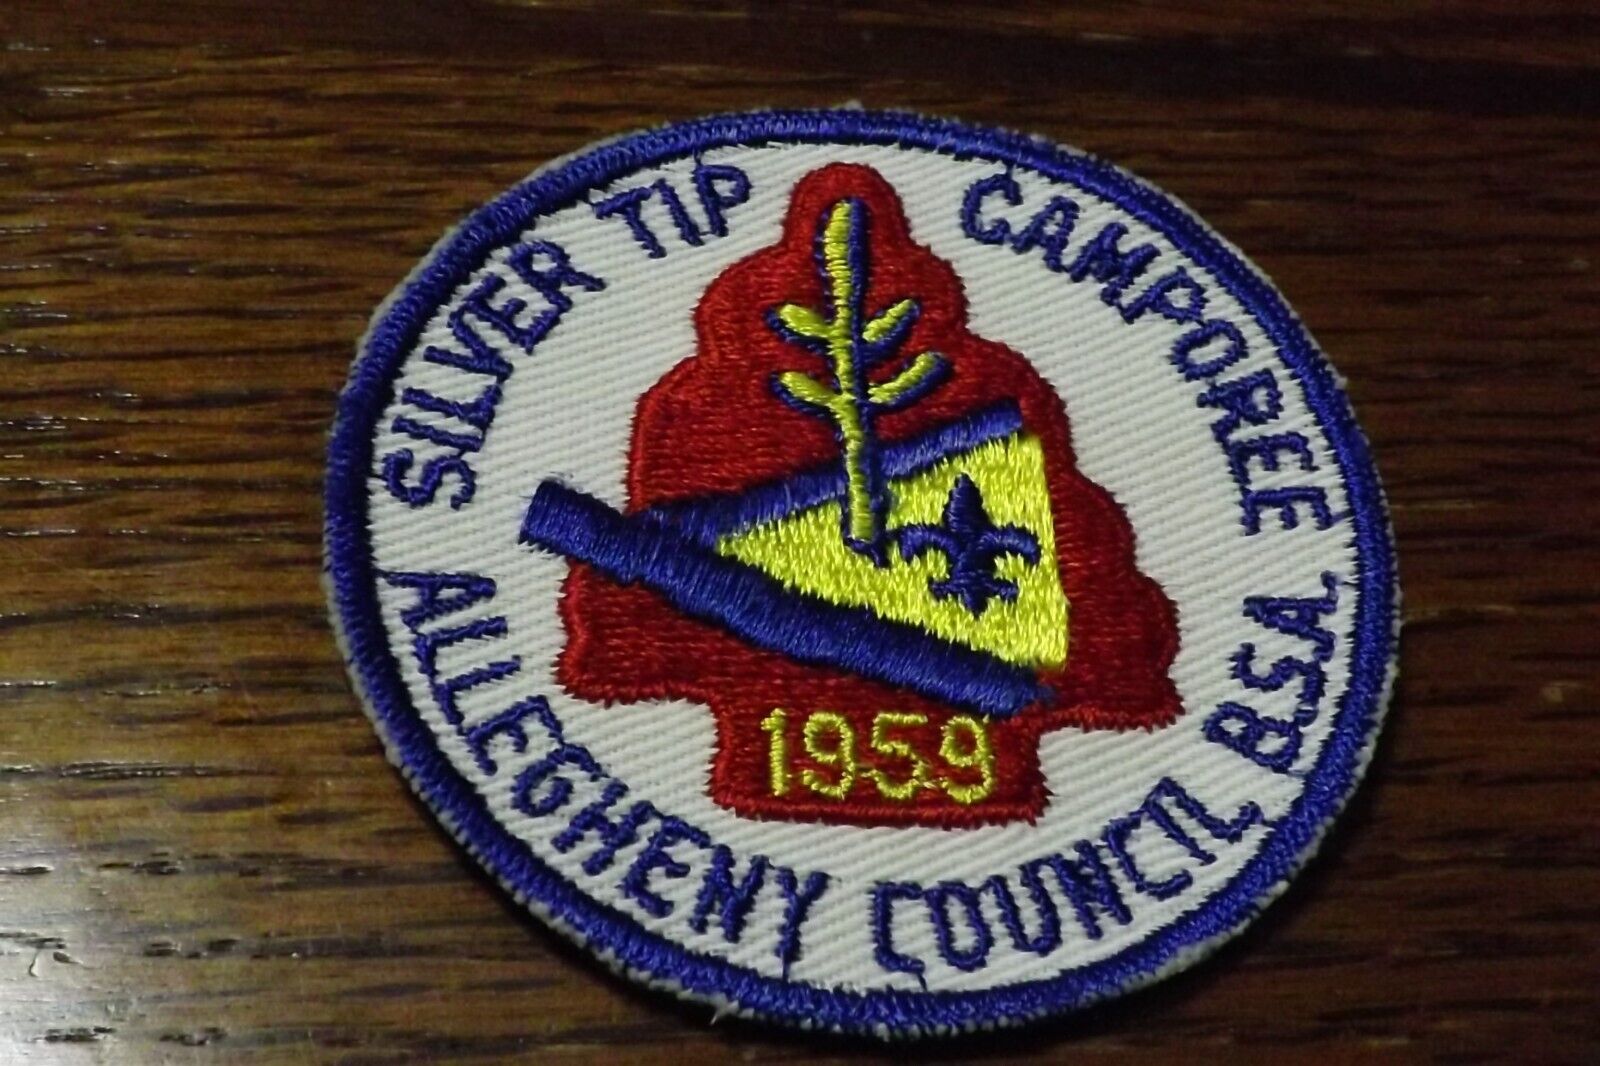 Boy Scout Patch 1959 ALLEGHENY COUNCIL SILVER TIP CAMPOREE